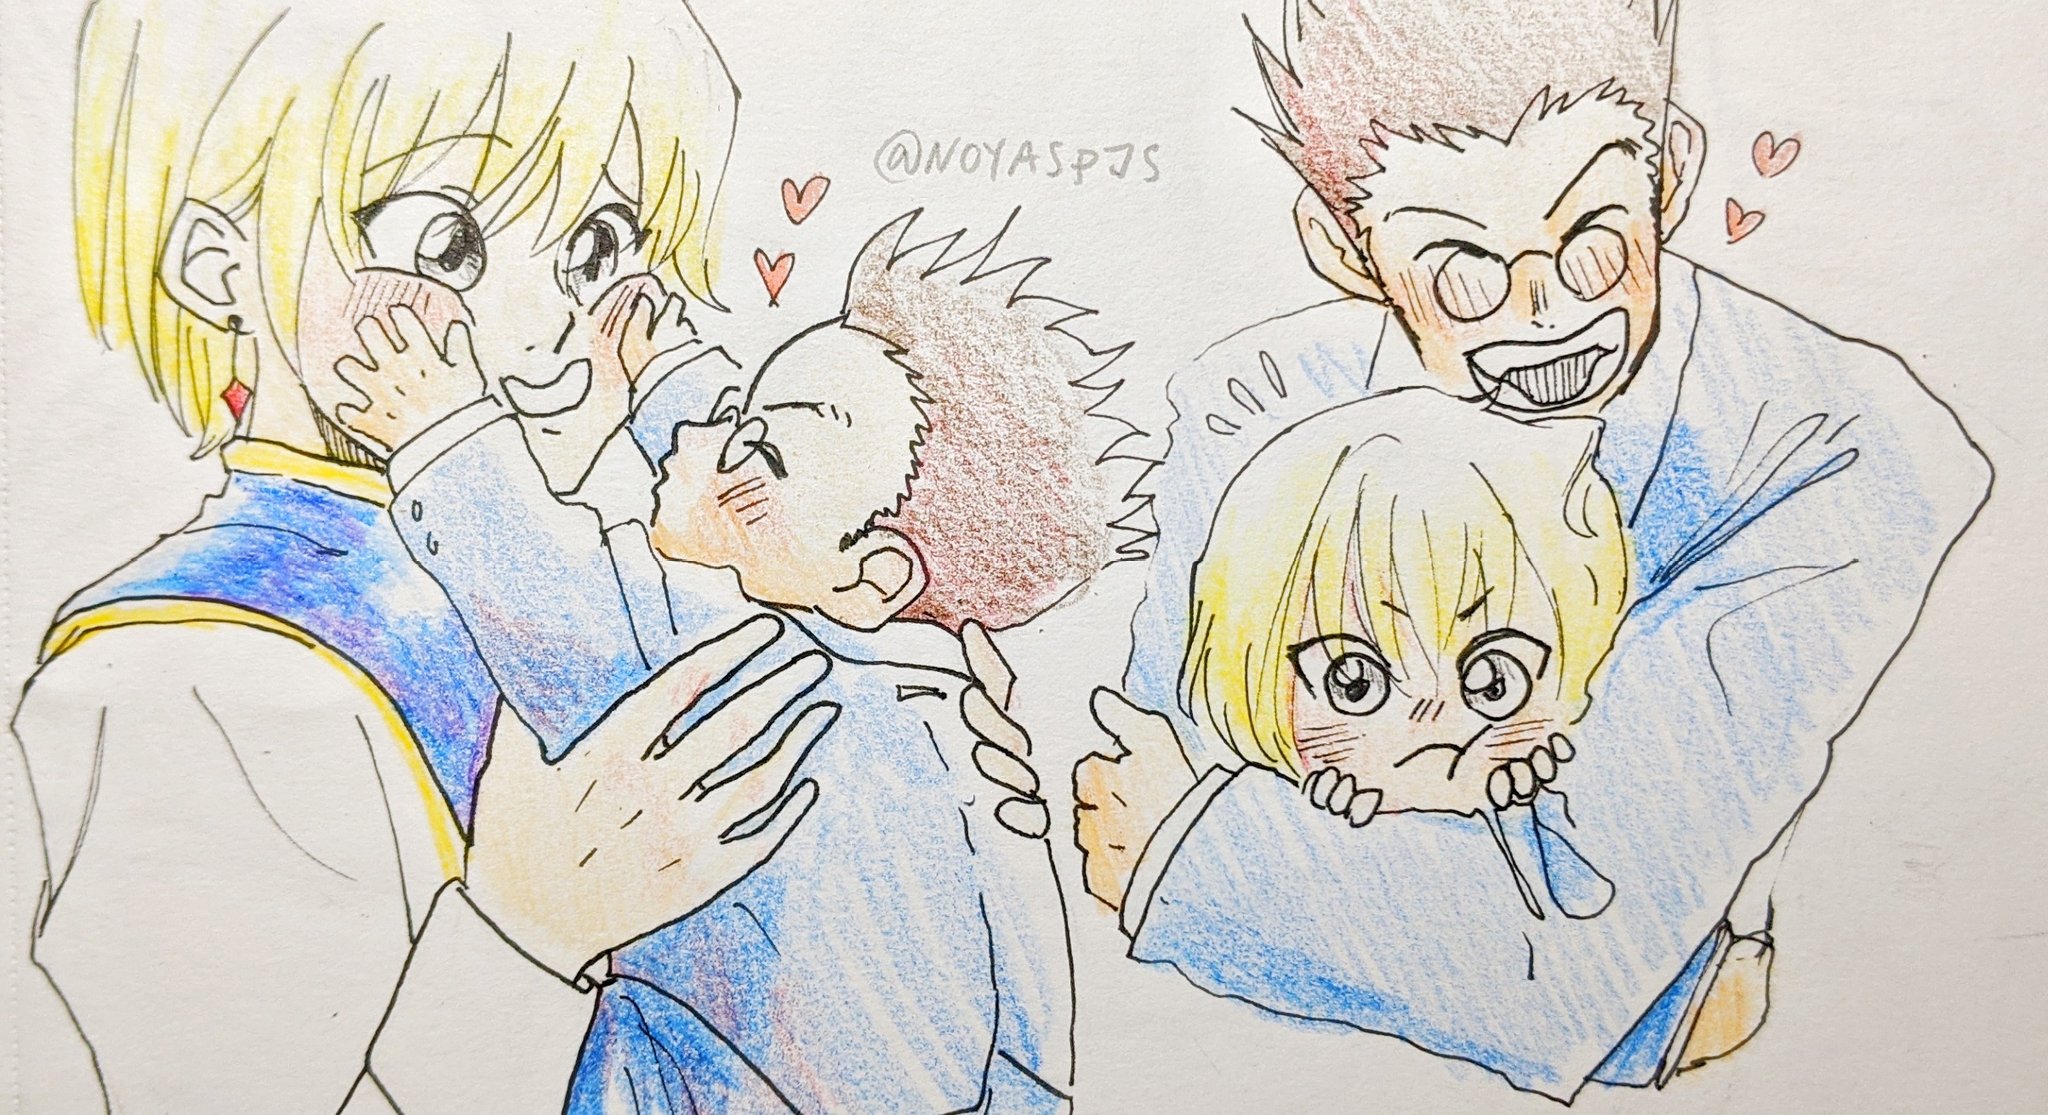 pj's art ✍️ on X: Today's food for thought: Kurapika with baby